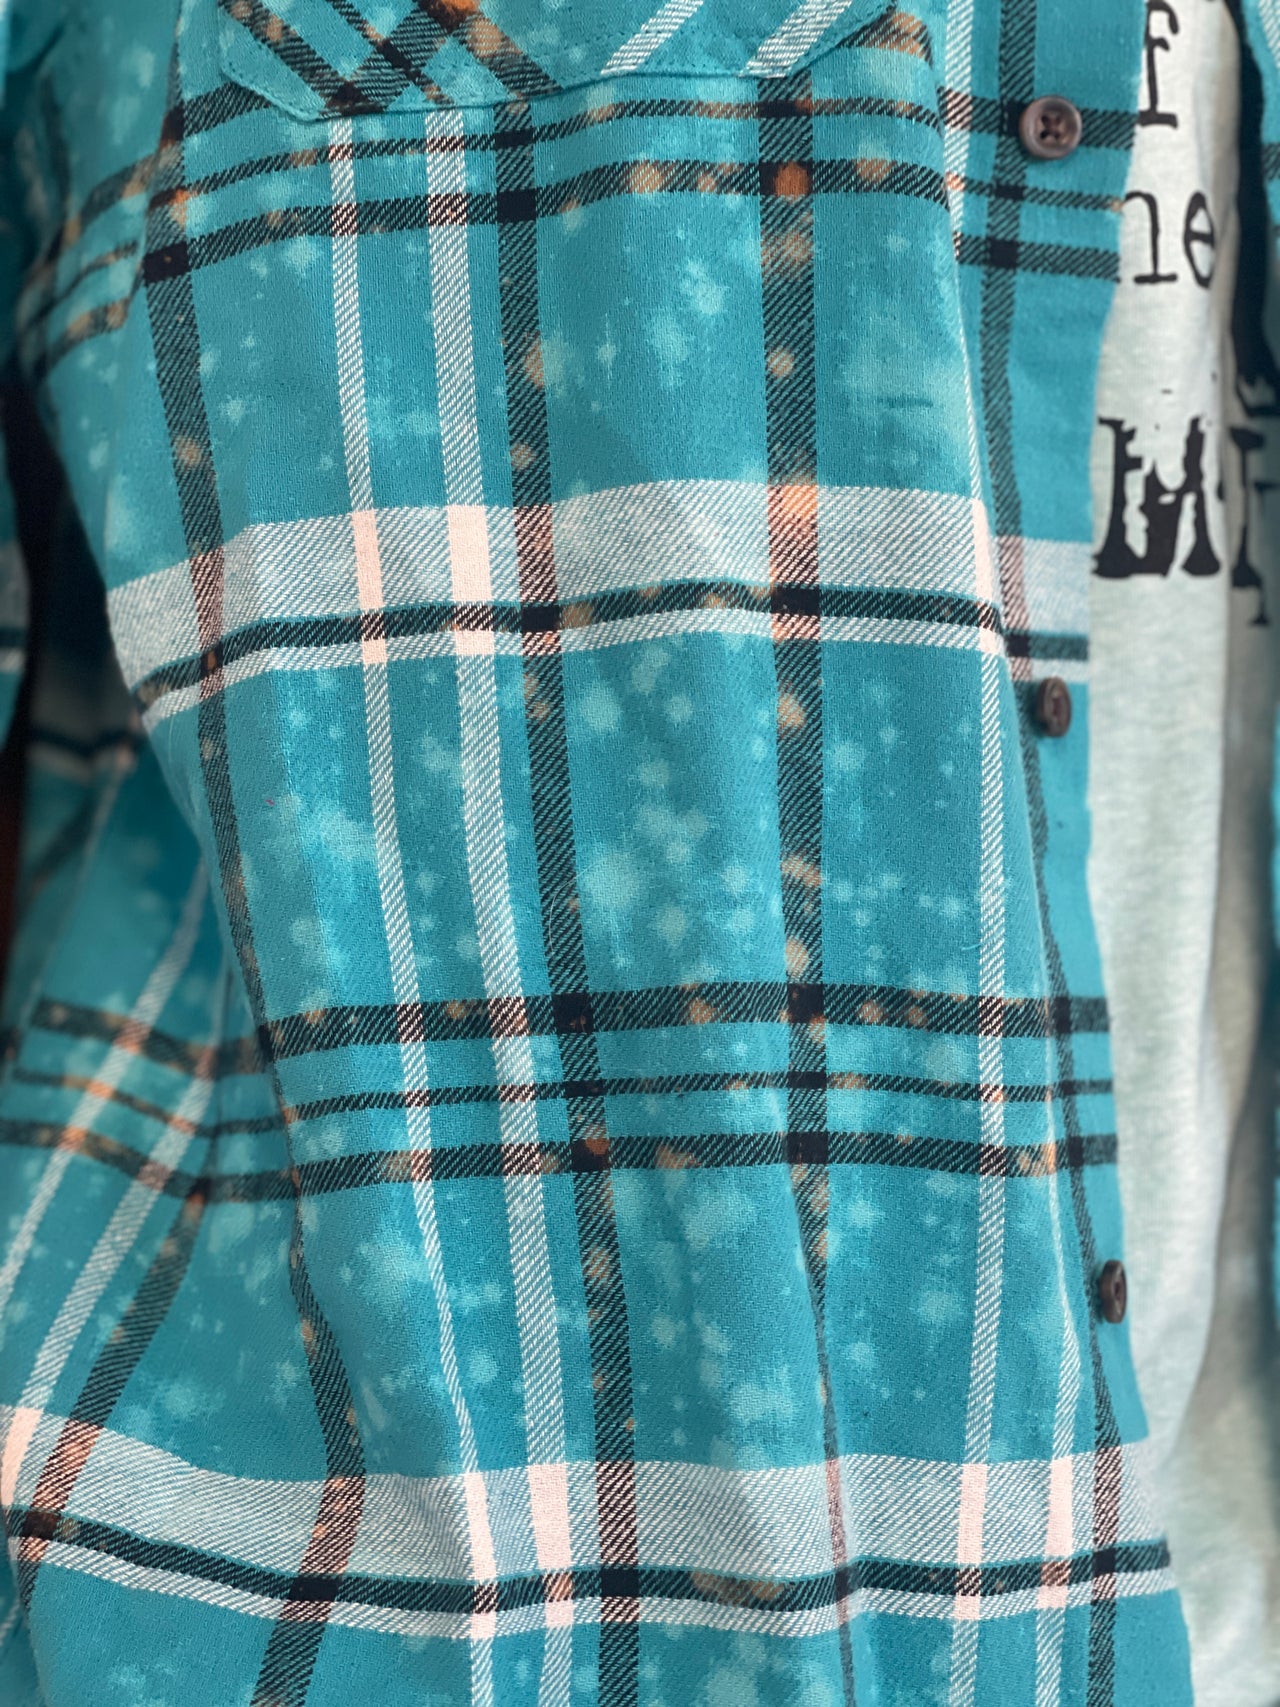 Feeling Squirrely Art Flannel- Distressed Turquoise